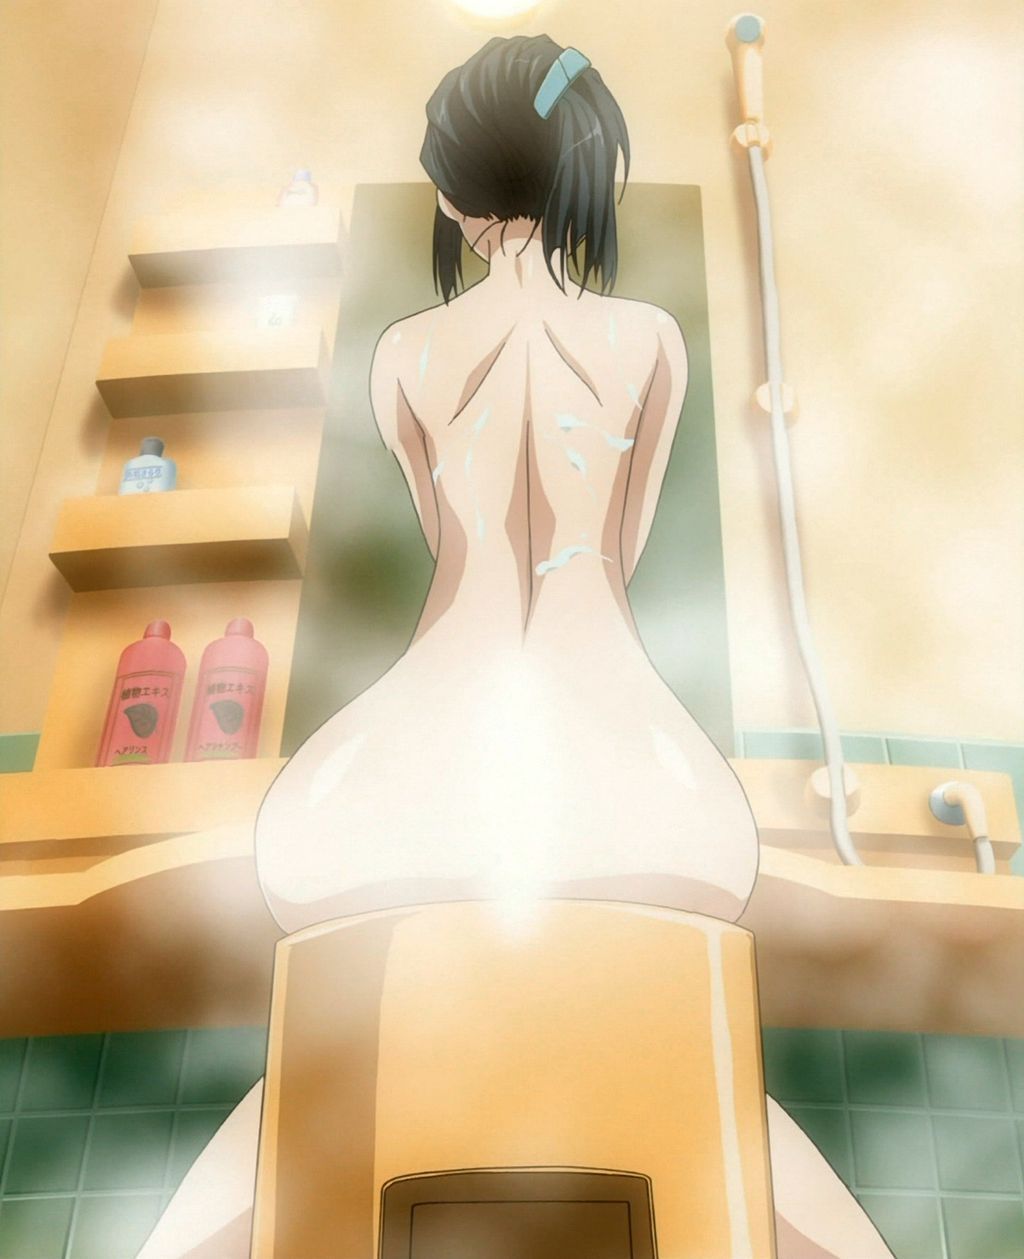 [Anime General] anime girl characters were hot springs / bath bathing siner images / [drawing revision] 15